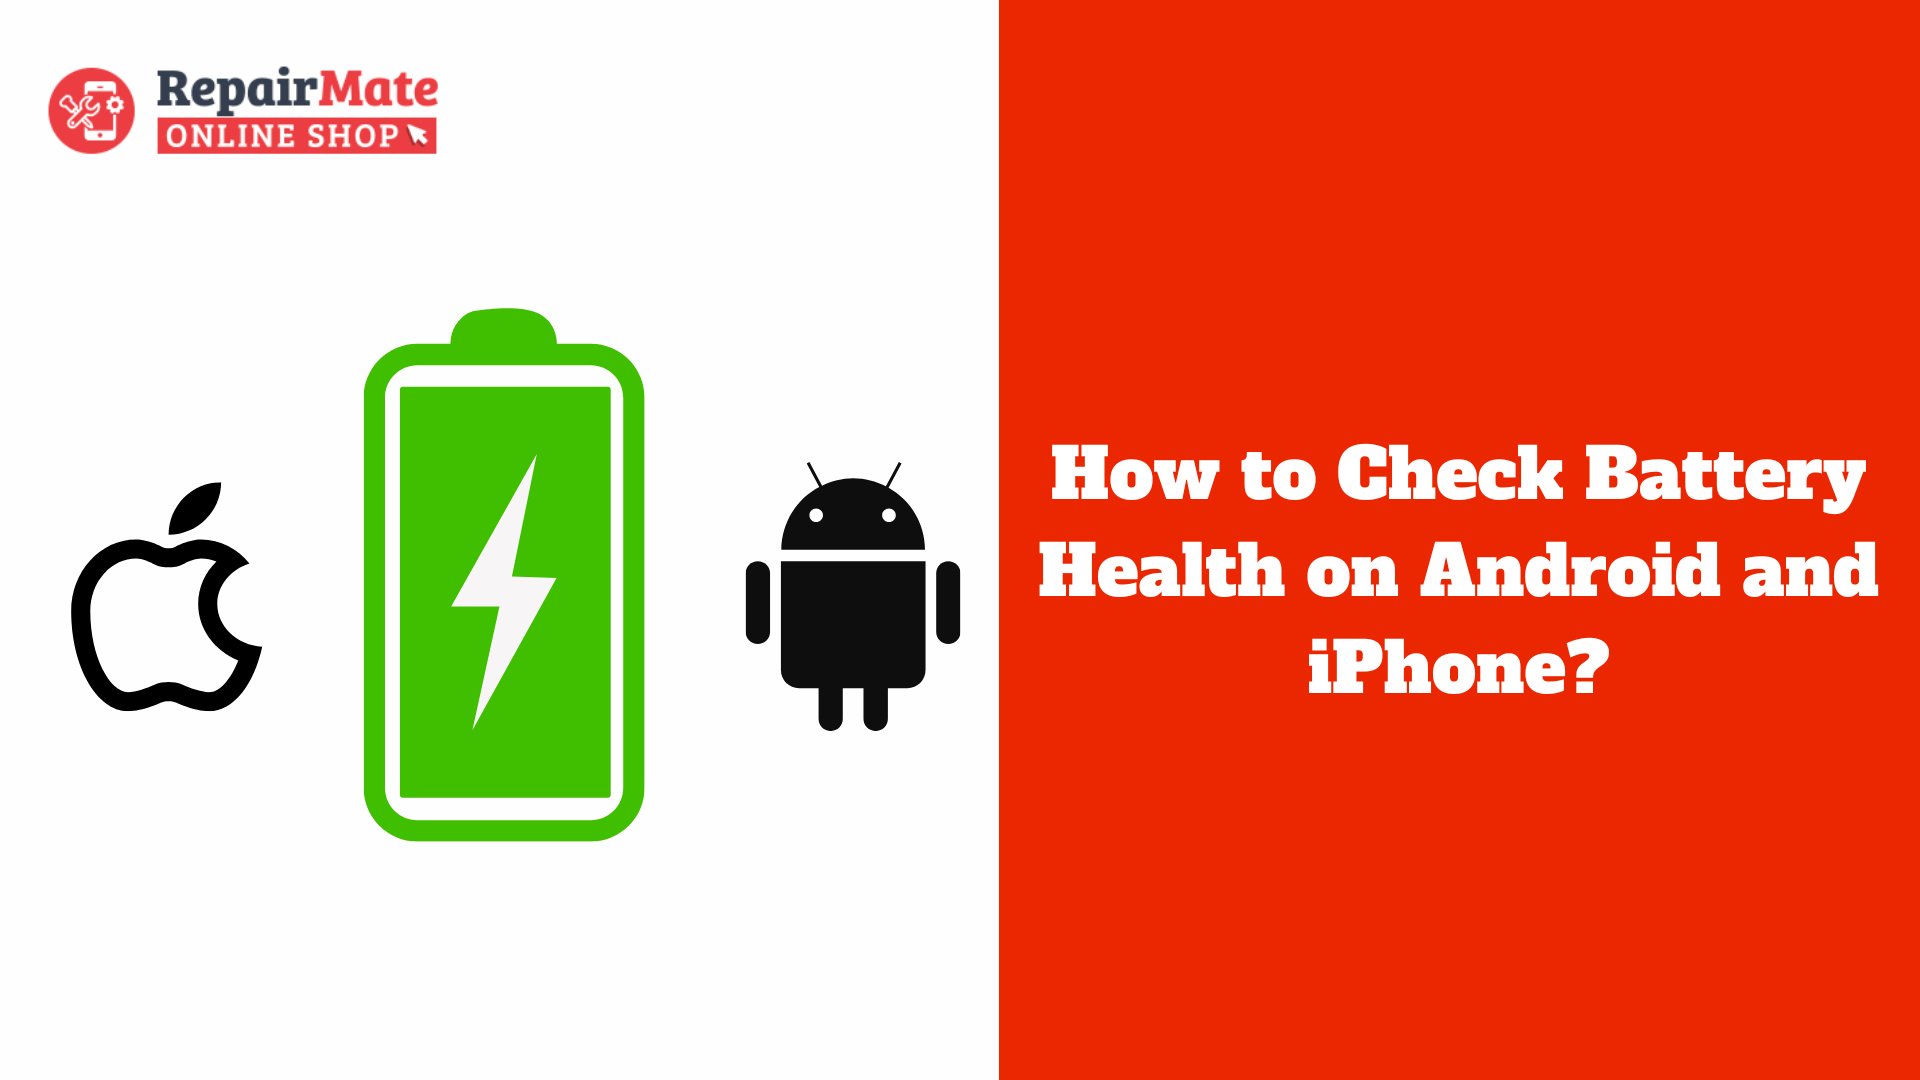 How to Check Battery Health on Android and iPhone